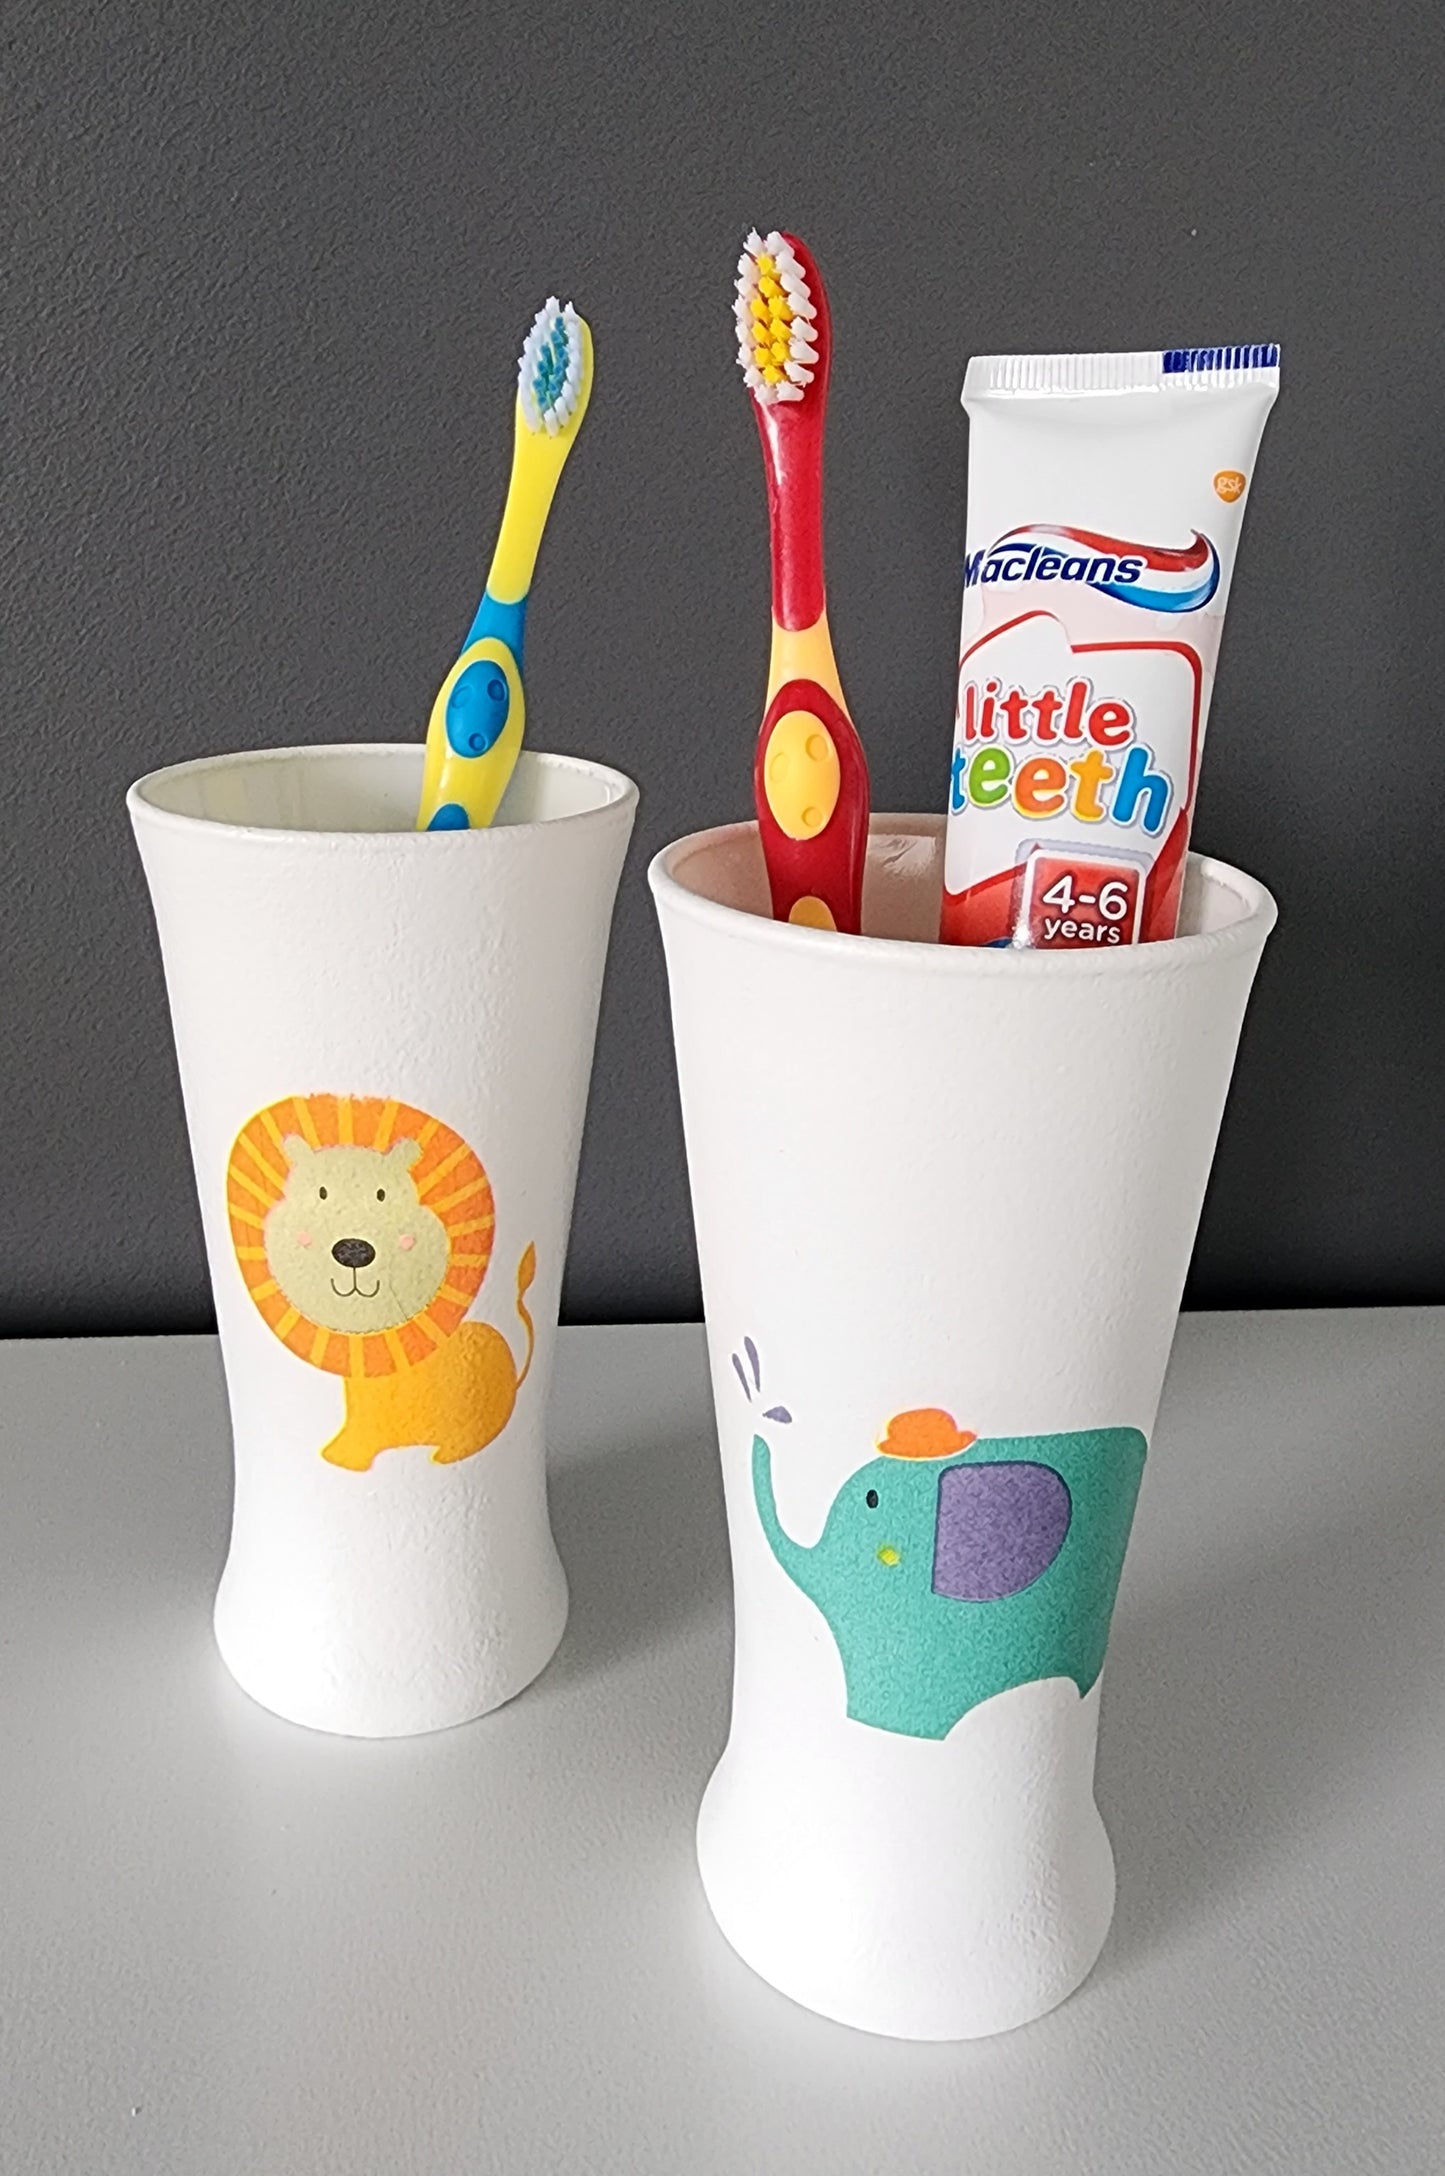 Lion and Elephant Set - Toothbrush Holders